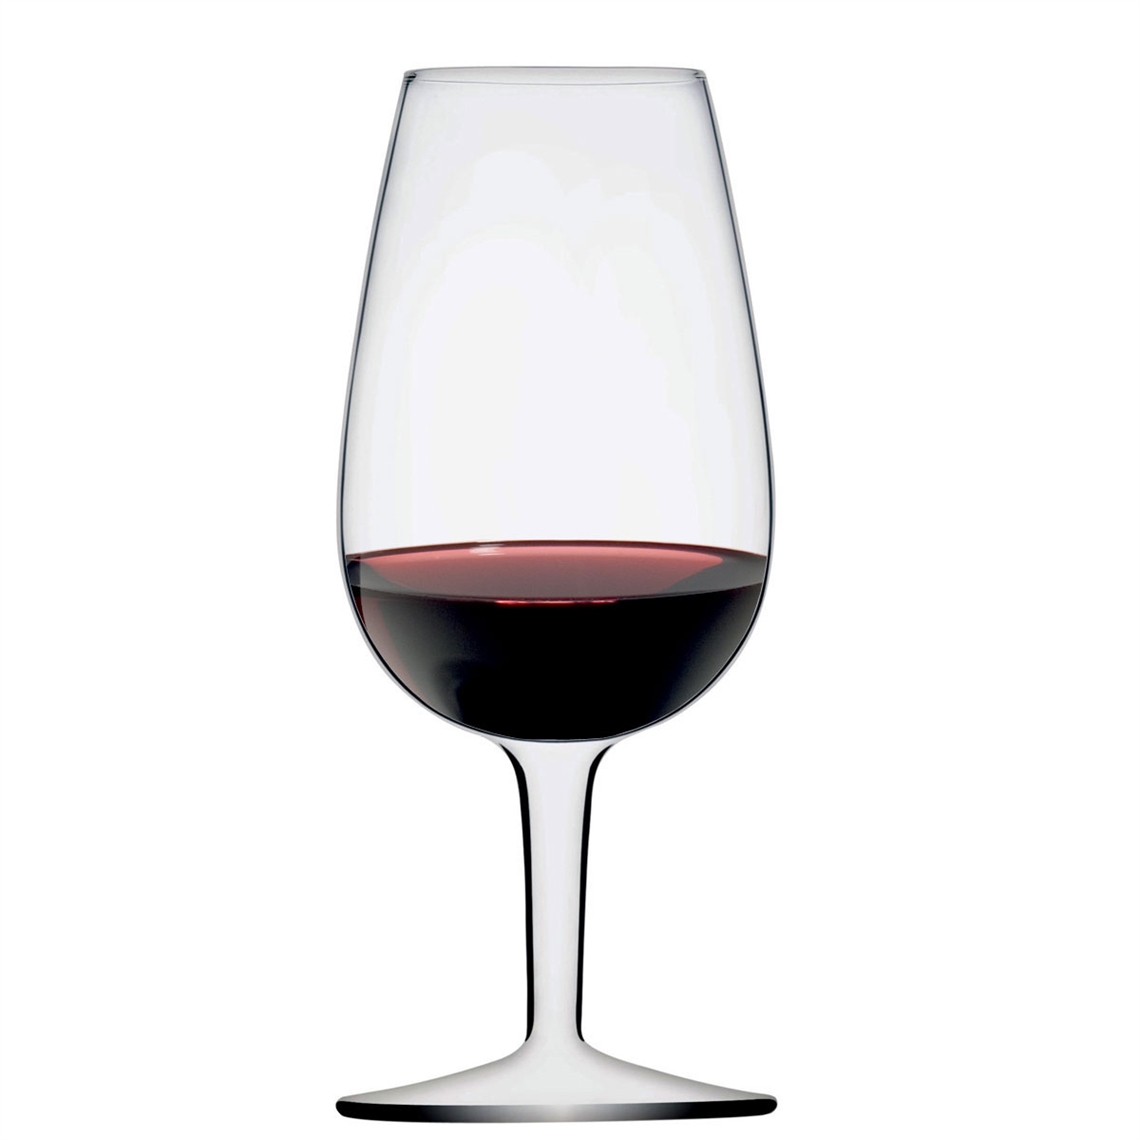 View more beginners guide to different types of wine glasses from our Wine Tasting Glasses range